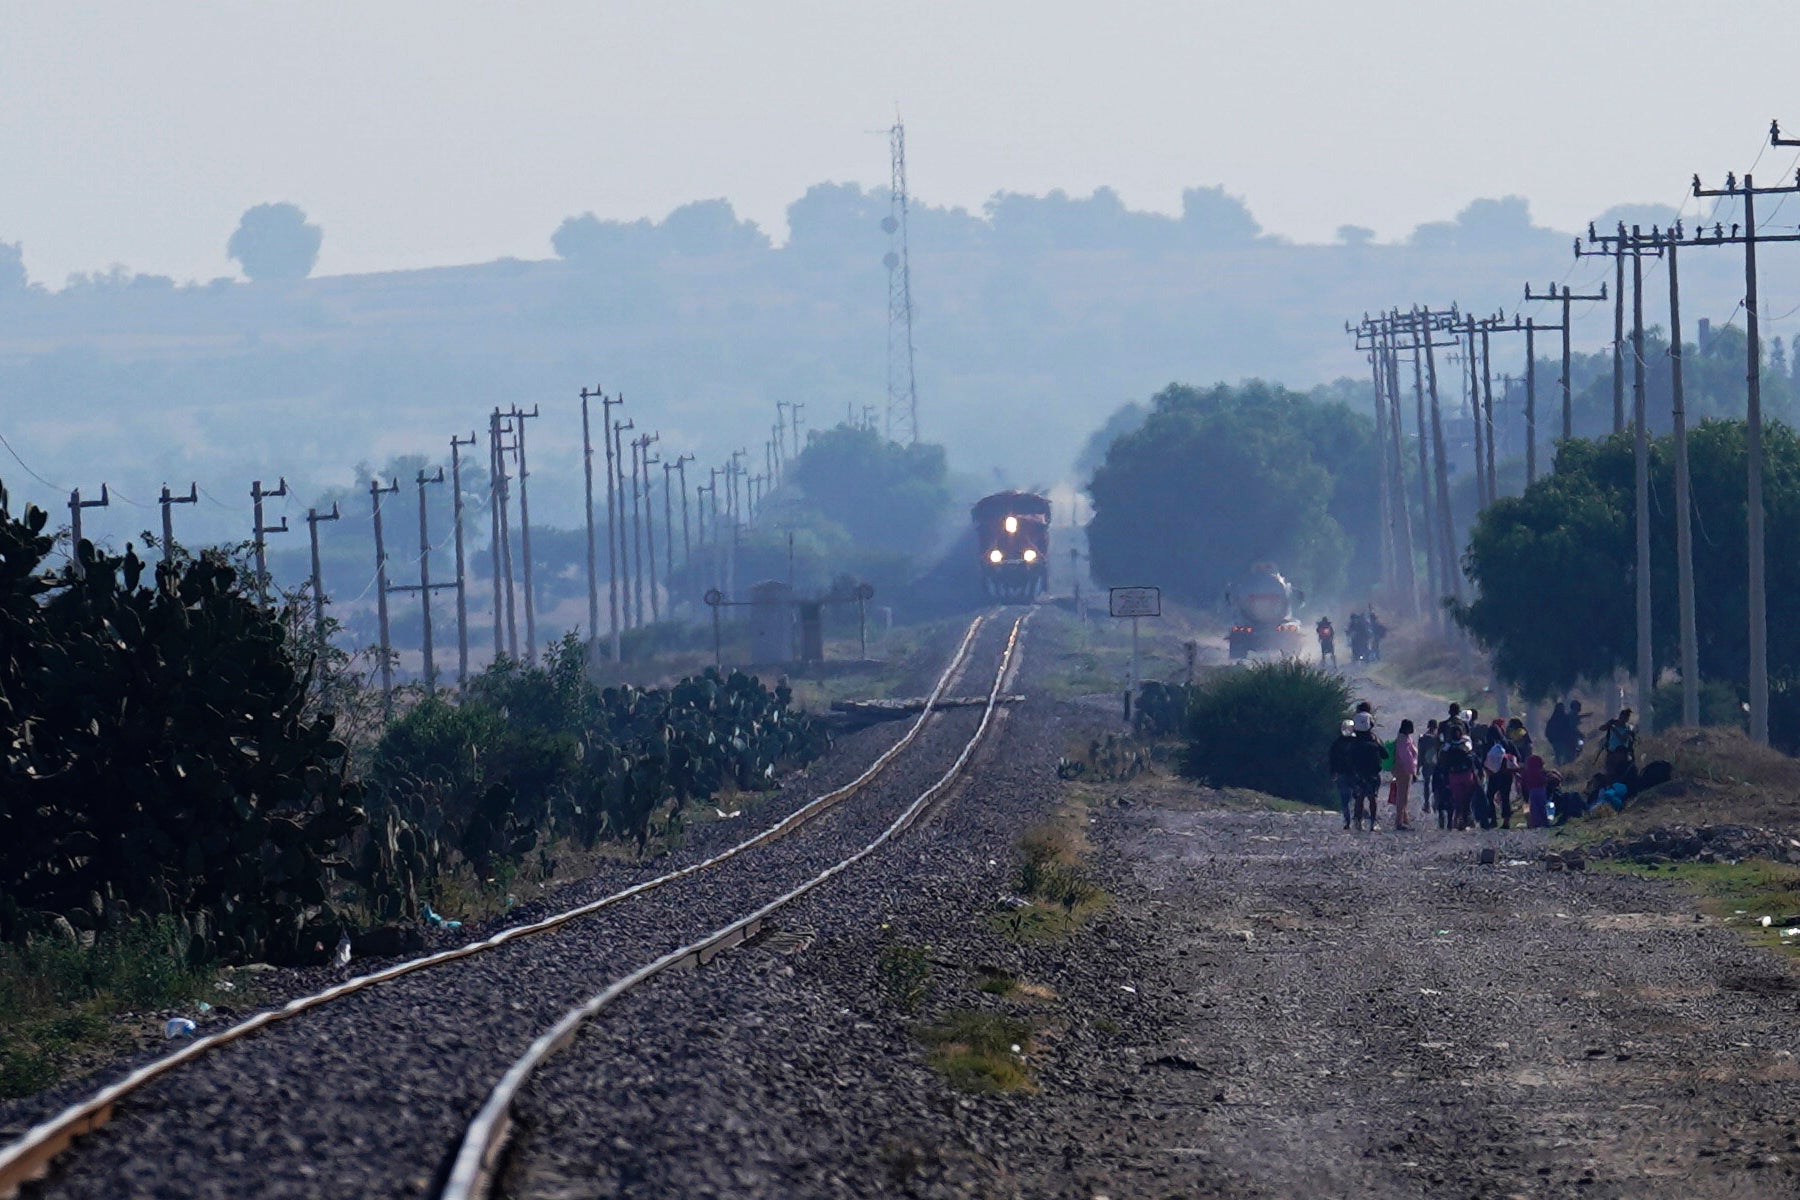 Does Indian Railways Still Pay the British for this Rail Line